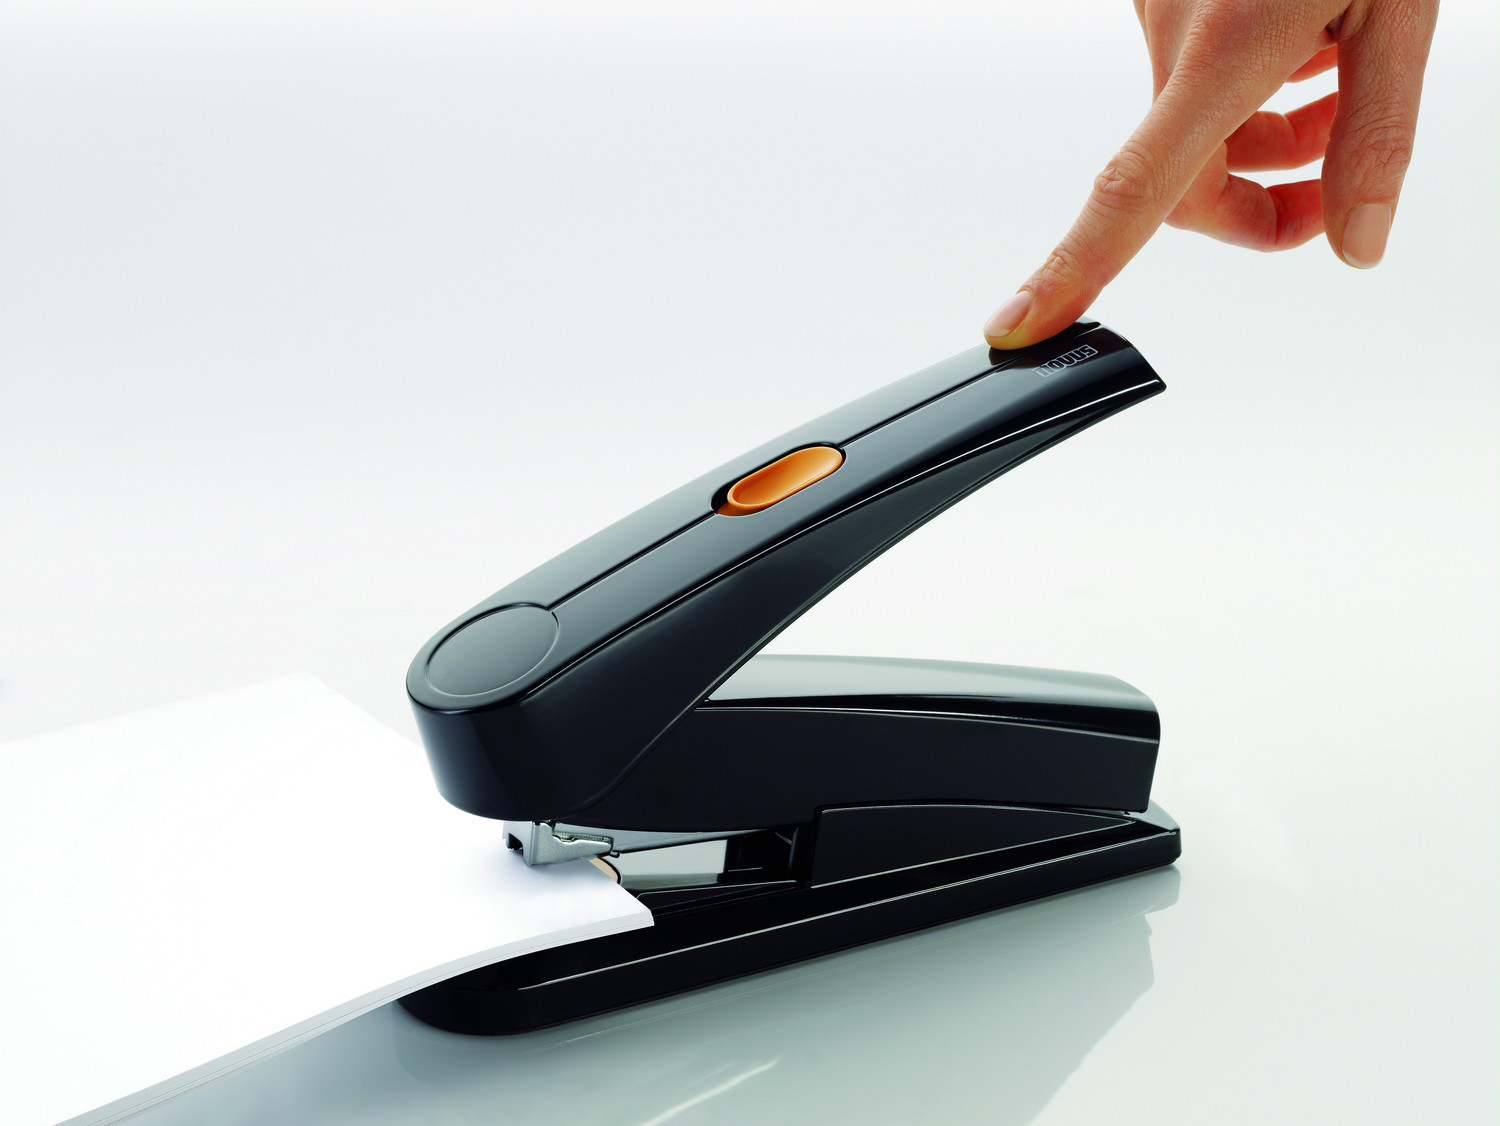 Stapling with Power on Demand: Lever raised for super-easy stapling - saves over 70% of the effort.